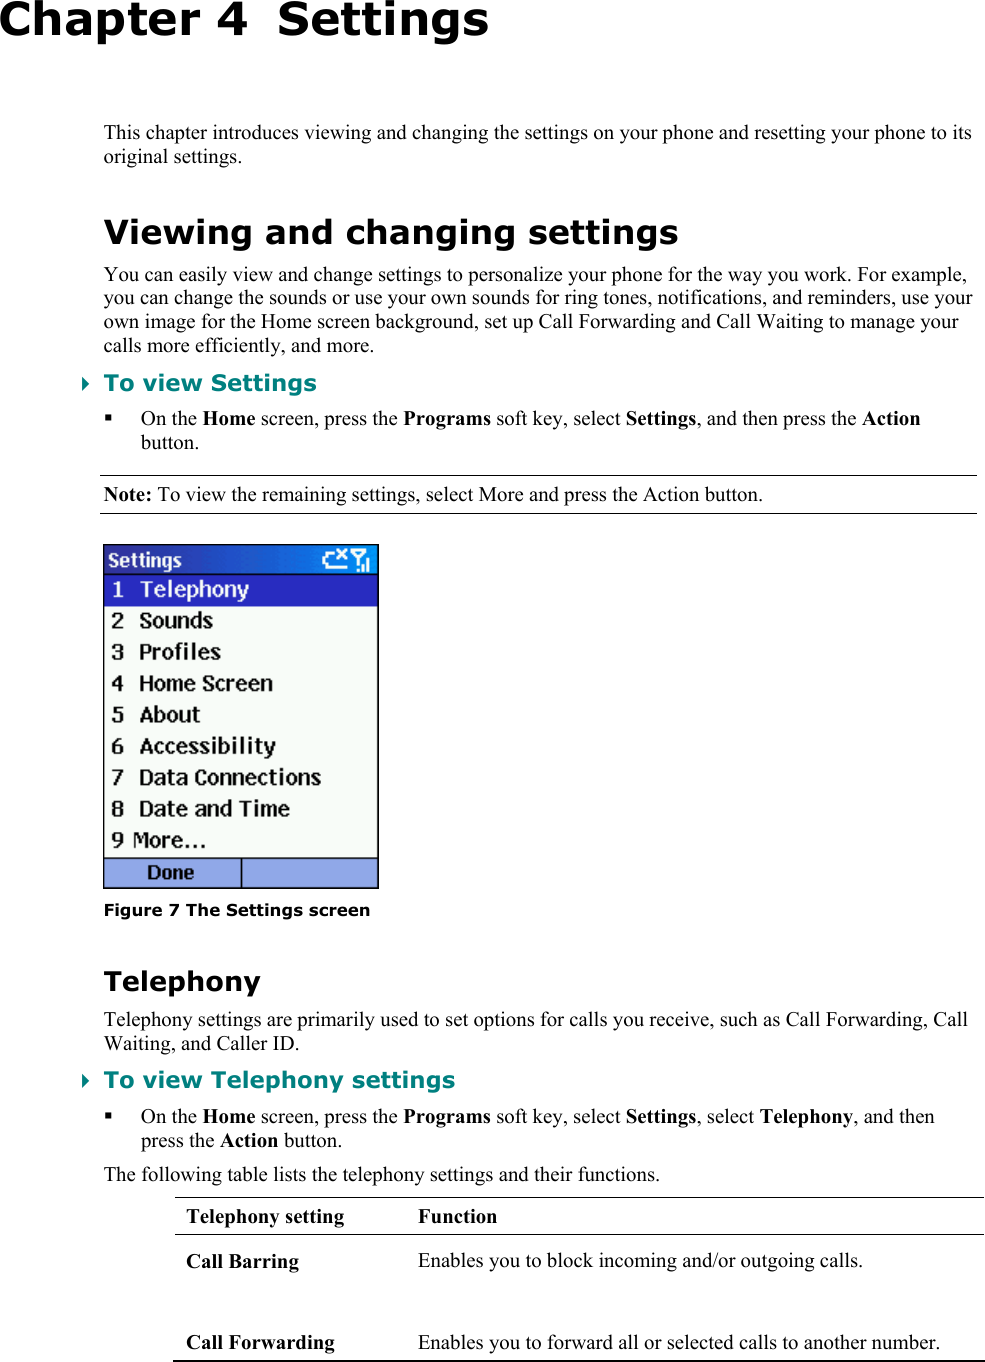   Chapter 4  Settings This chapter introduces viewing and changing the settings on your phone and resetting your phone to its original settings. Viewing and changing settings You can easily view and change settings to personalize your phone for the way you work. For example, you can change the sounds or use your own sounds for ring tones, notifications, and reminders, use your own image for the Home screen background, set up Call Forwarding and Call Waiting to manage your calls more efficiently, and more.  To view Settings  On the Home screen, press the Programs soft key, select Settings, and then press the Action button. Note: To view the remaining settings, select More and press the Action button.  Figure 7 The Settings screen Telephony Telephony settings are primarily used to set options for calls you receive, such as Call Forwarding, Call Waiting, and Caller ID.  To view Telephony settings  On the Home screen, press the Programs soft key, select Settings, select Telephony, and then press the Action button. The following table lists the telephony settings and their functions. Telephony setting  Function Call Barring  Enables you to block incoming and/or outgoing calls.  Call Forwarding  Enables you to forward all or selected calls to another number. 